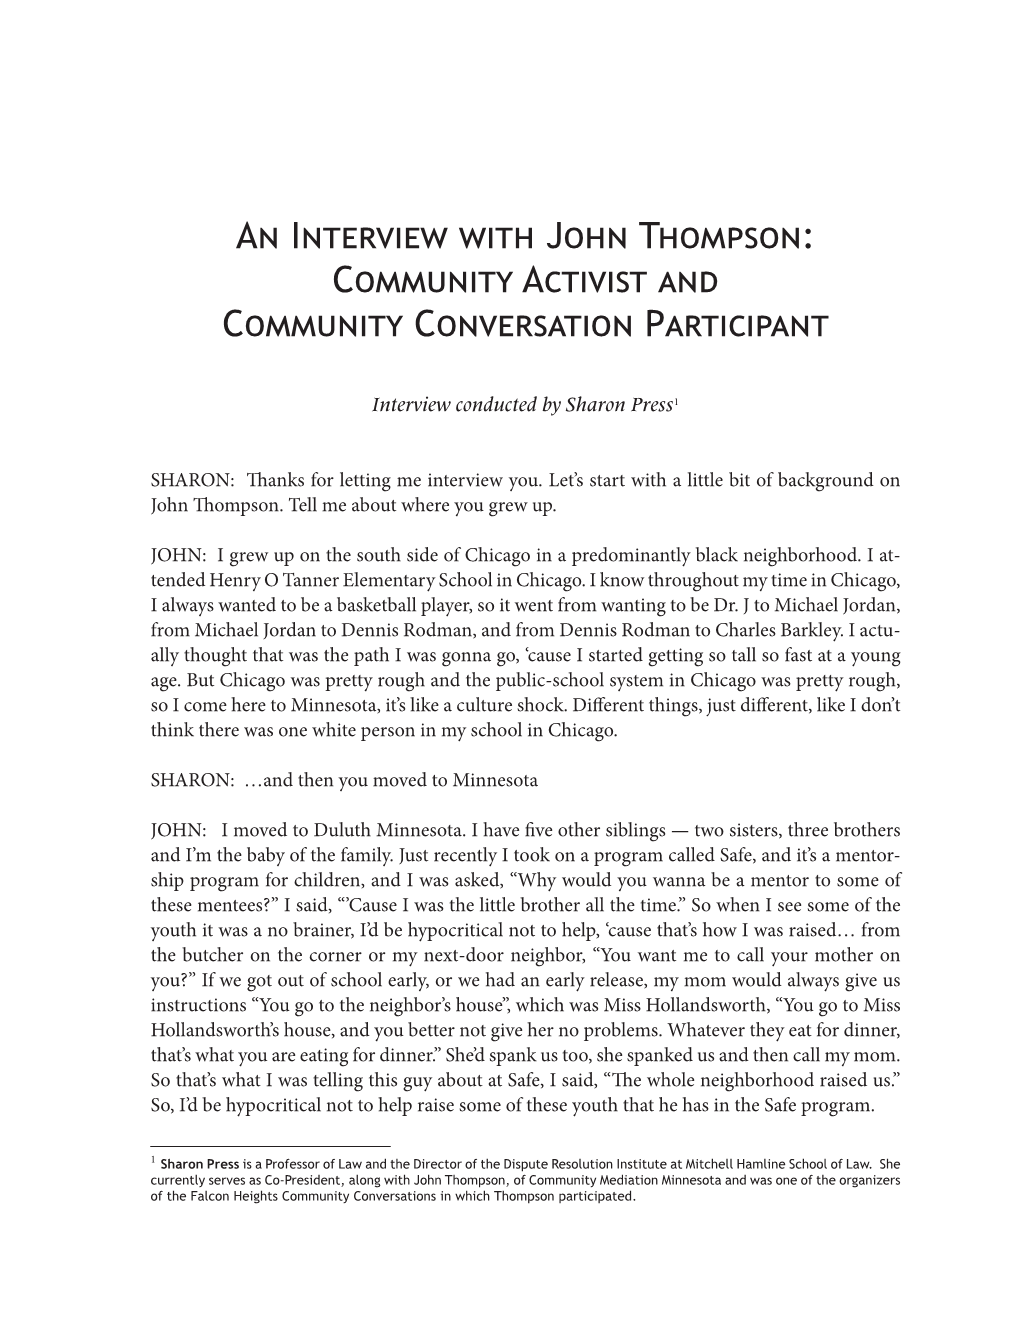 An Interview with John Thompson: Community Activist and Community Conversation Participant